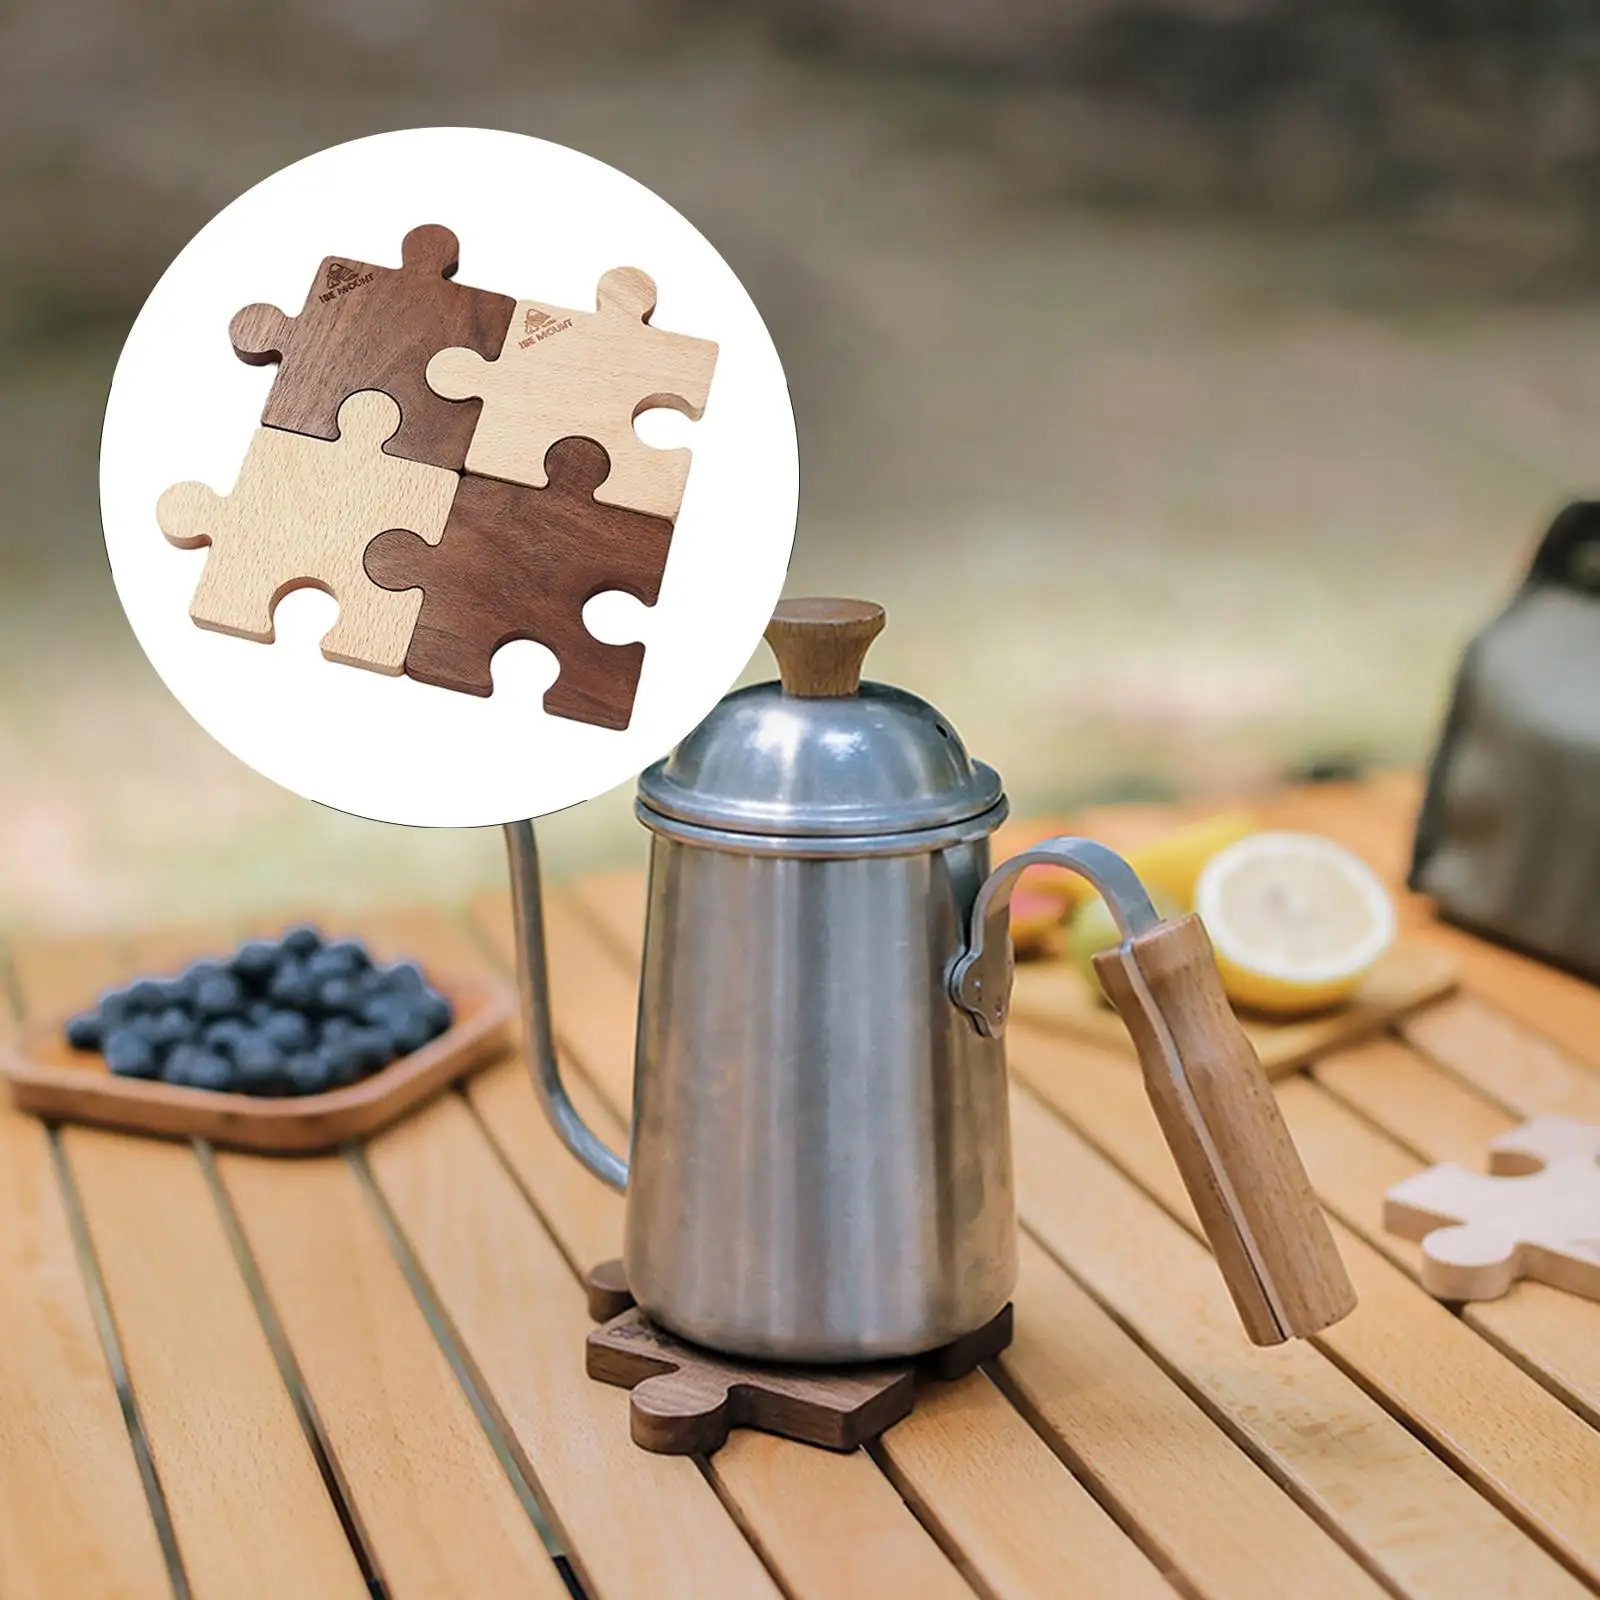 4x Wooden Coasters Jigsaw Puzzle Design Creative Heat Resistant Decoration Housewarming Gifts Coffee Cup Mat for Office Tabletop